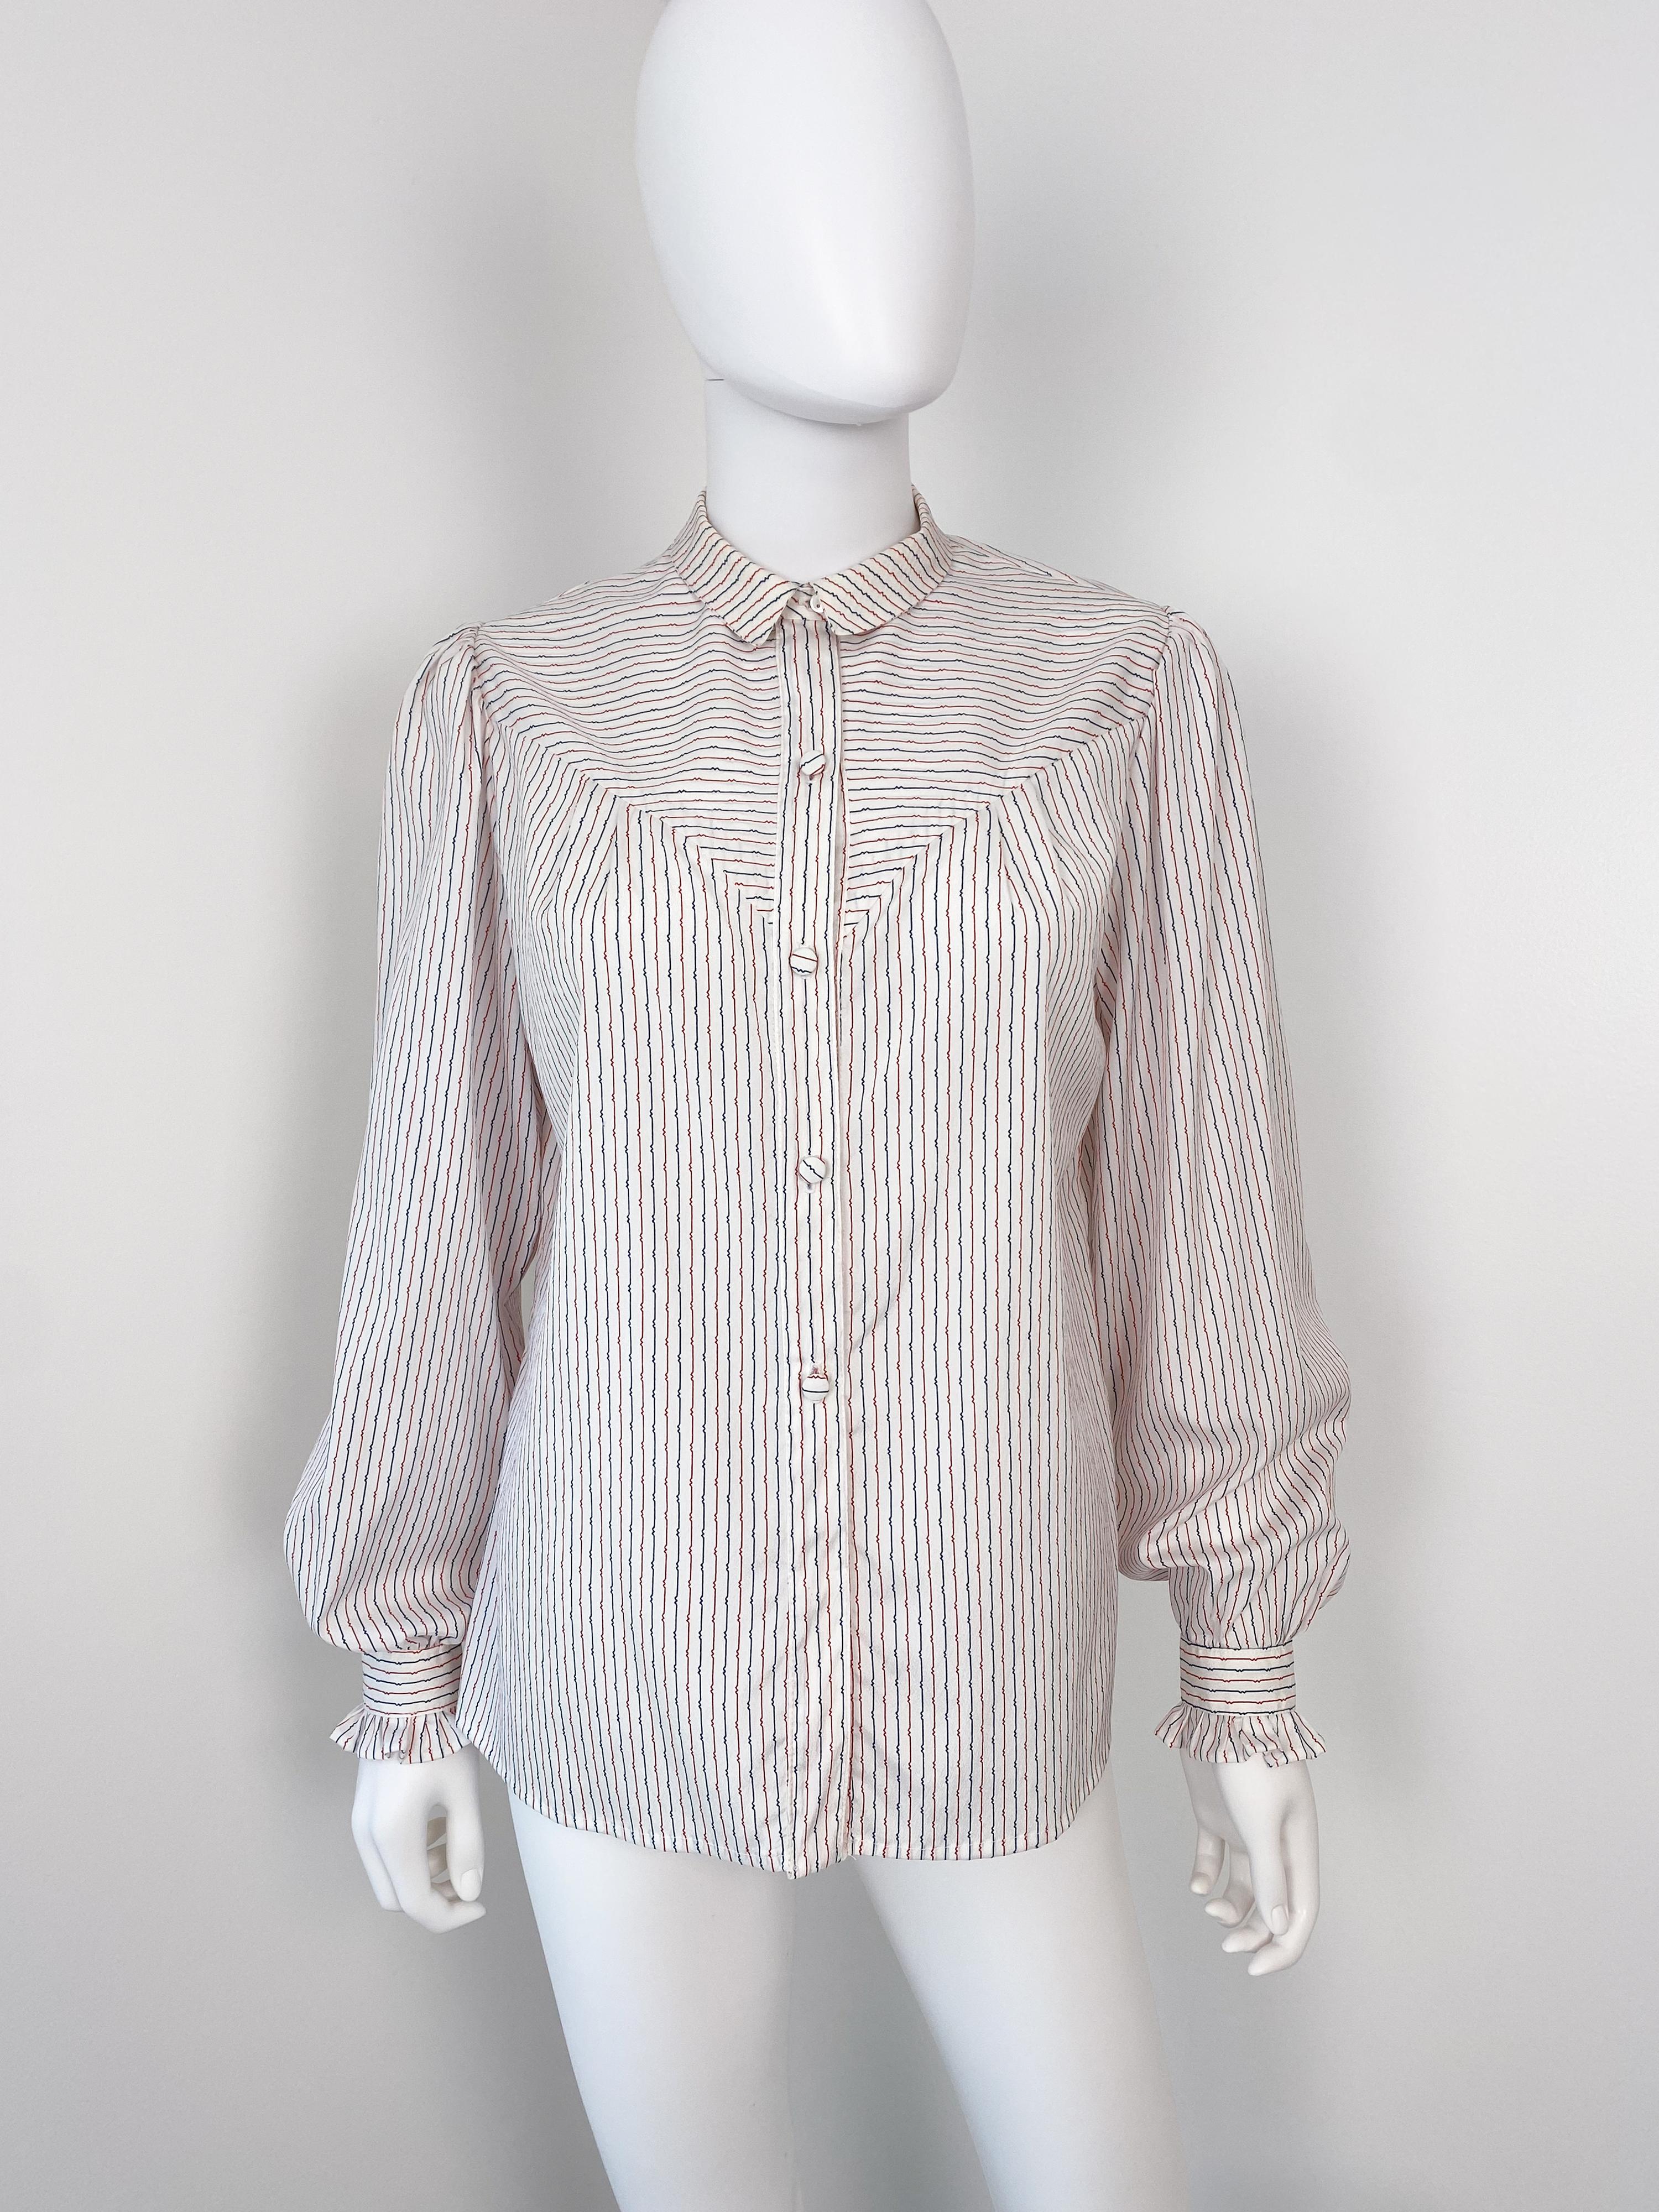 Wonderful vintage 1980s silky polyester western-style blouse. White color fabric with striped pattern in red and blue colors. Contrasting fabric insert on the chest and back. Romantic fabric ruffles at the button cuffs. There is gentle pleating at